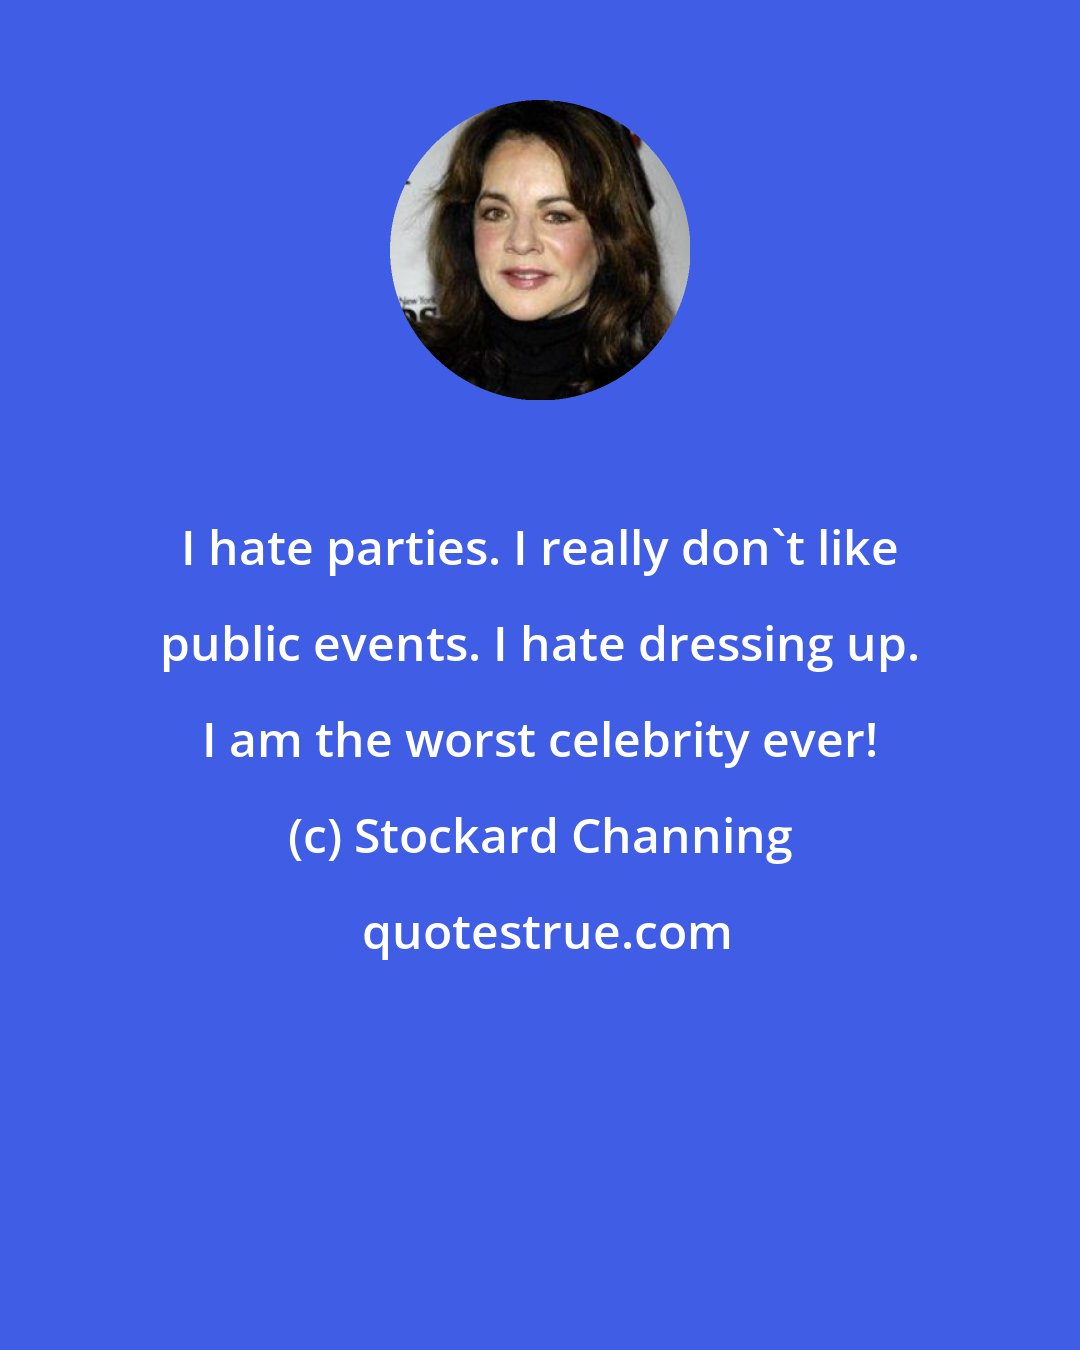 Stockard Channing: I hate parties. I really don't like public events. I hate dressing up. I am the worst celebrity ever!